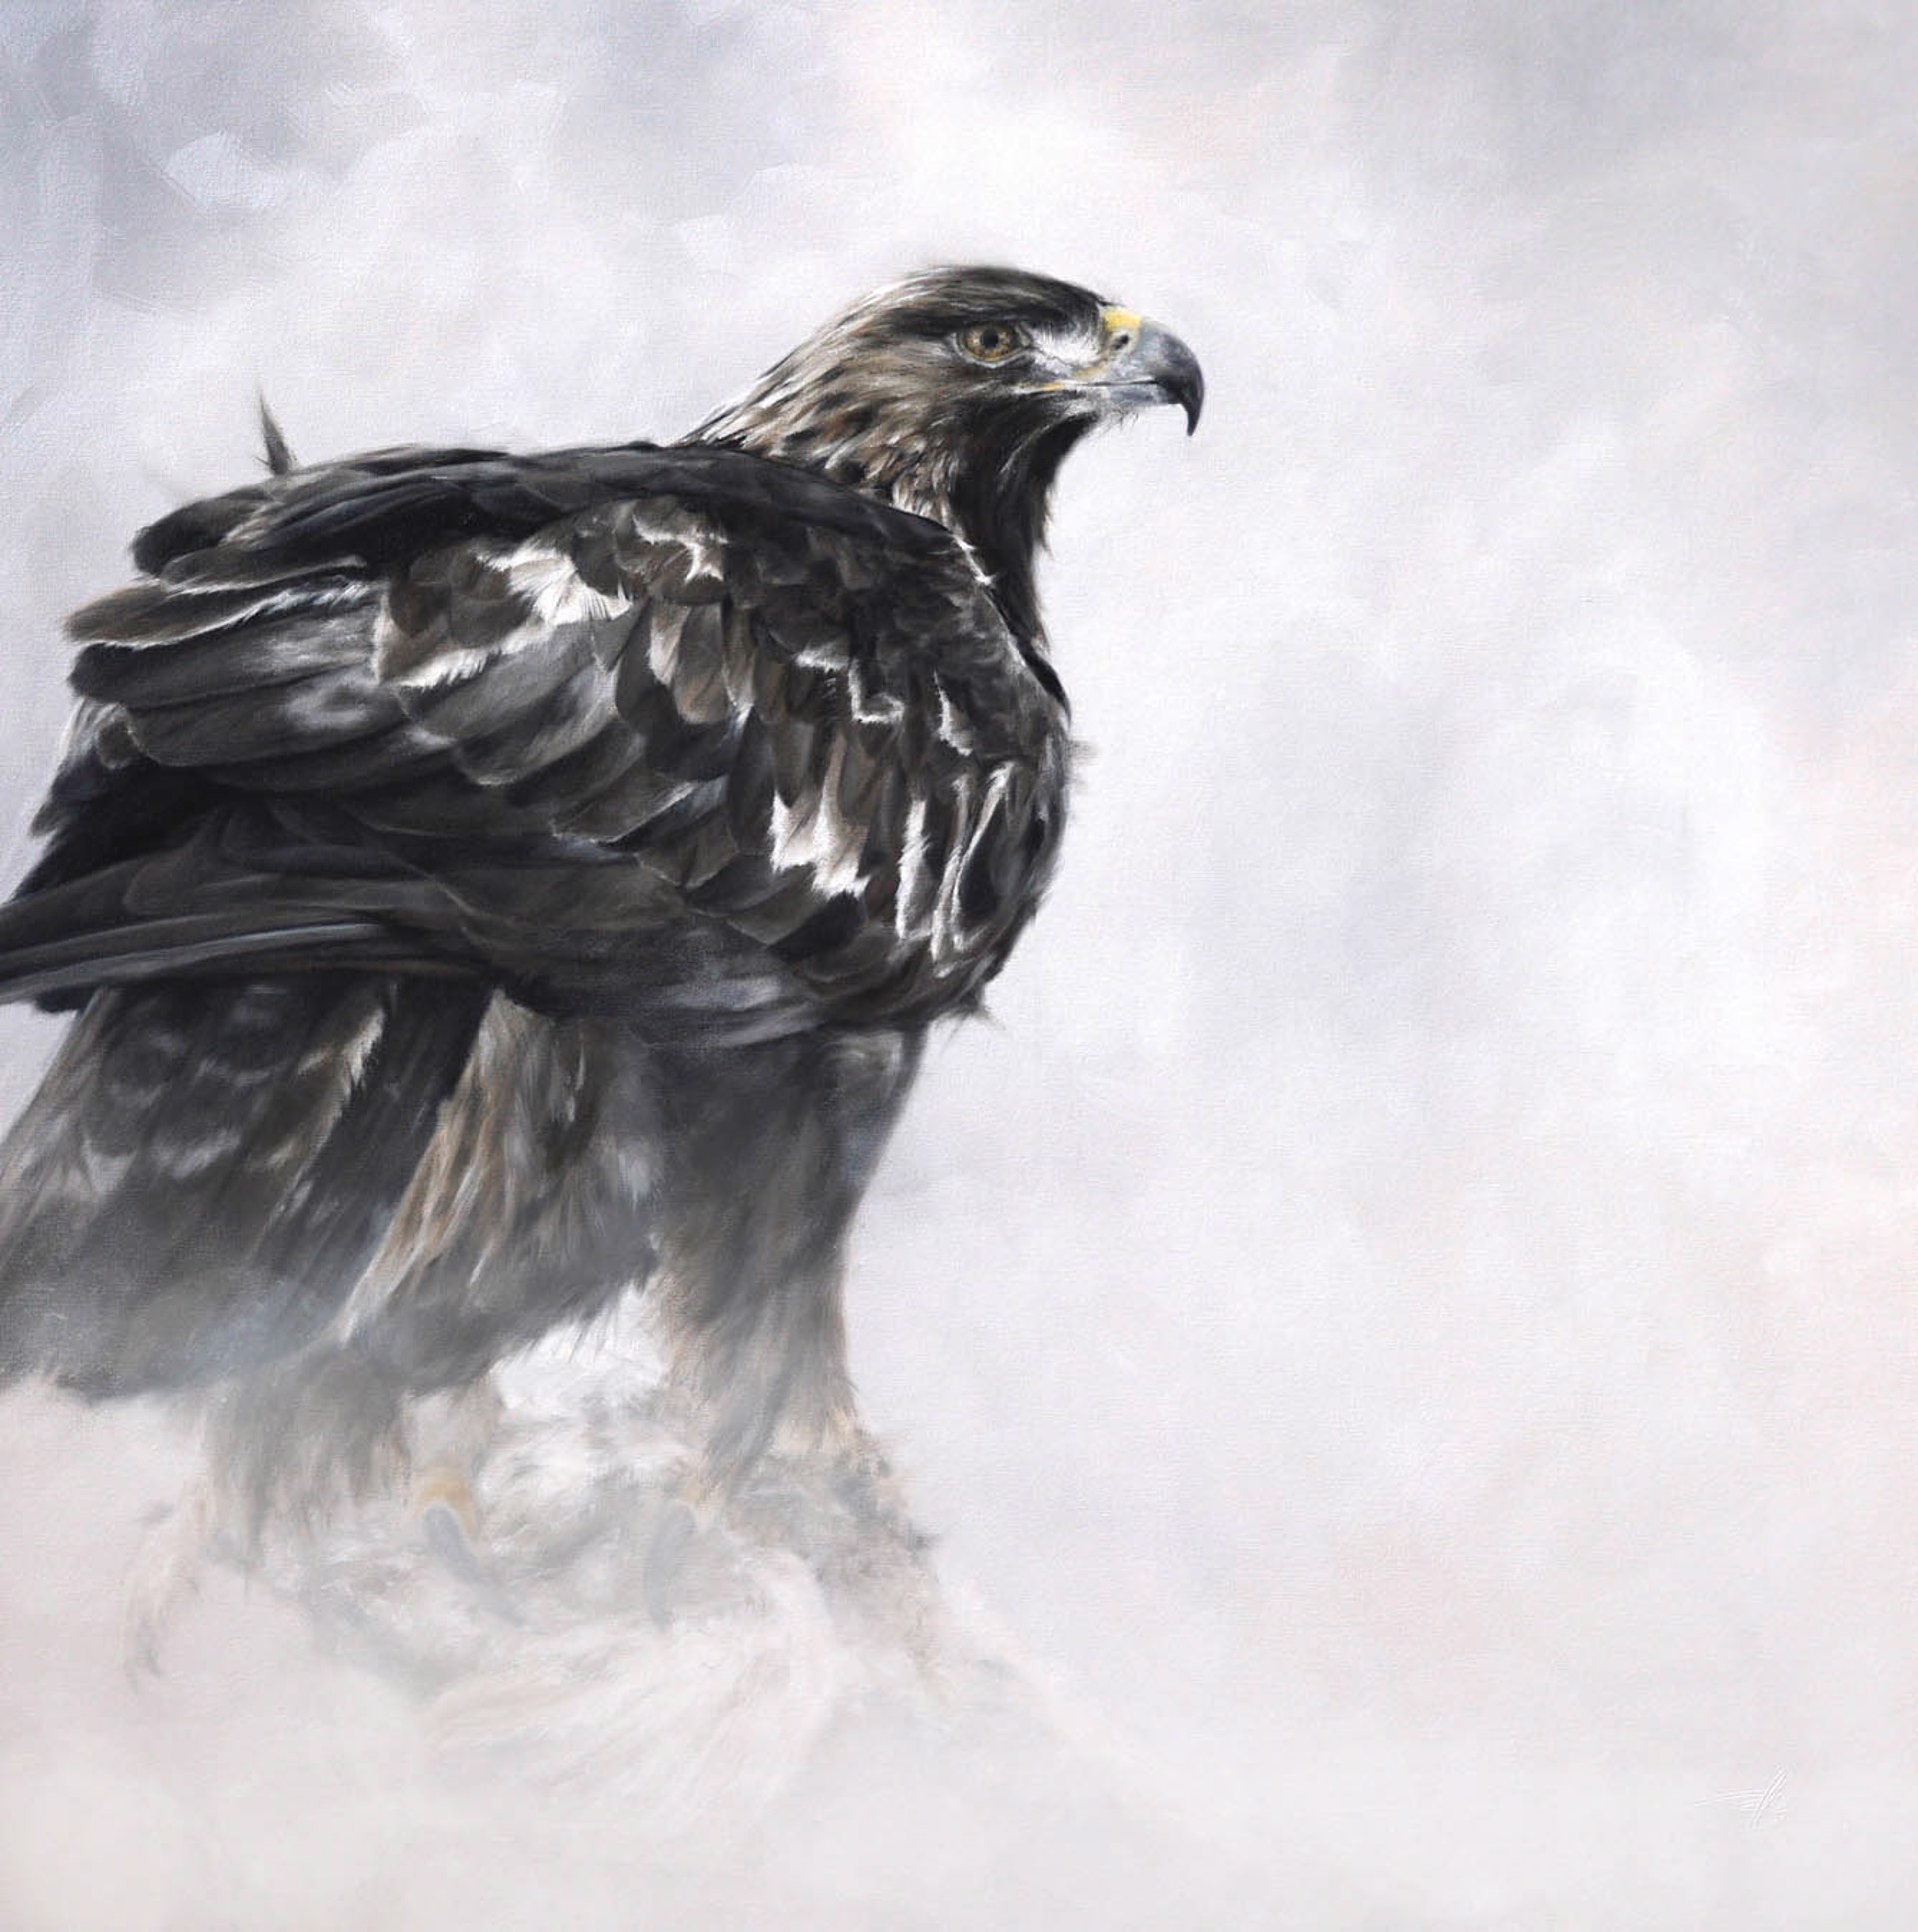 Original Oil Painting By Doyle Hostetler Featuring A Golden Eagle In A Muted Color Scheme